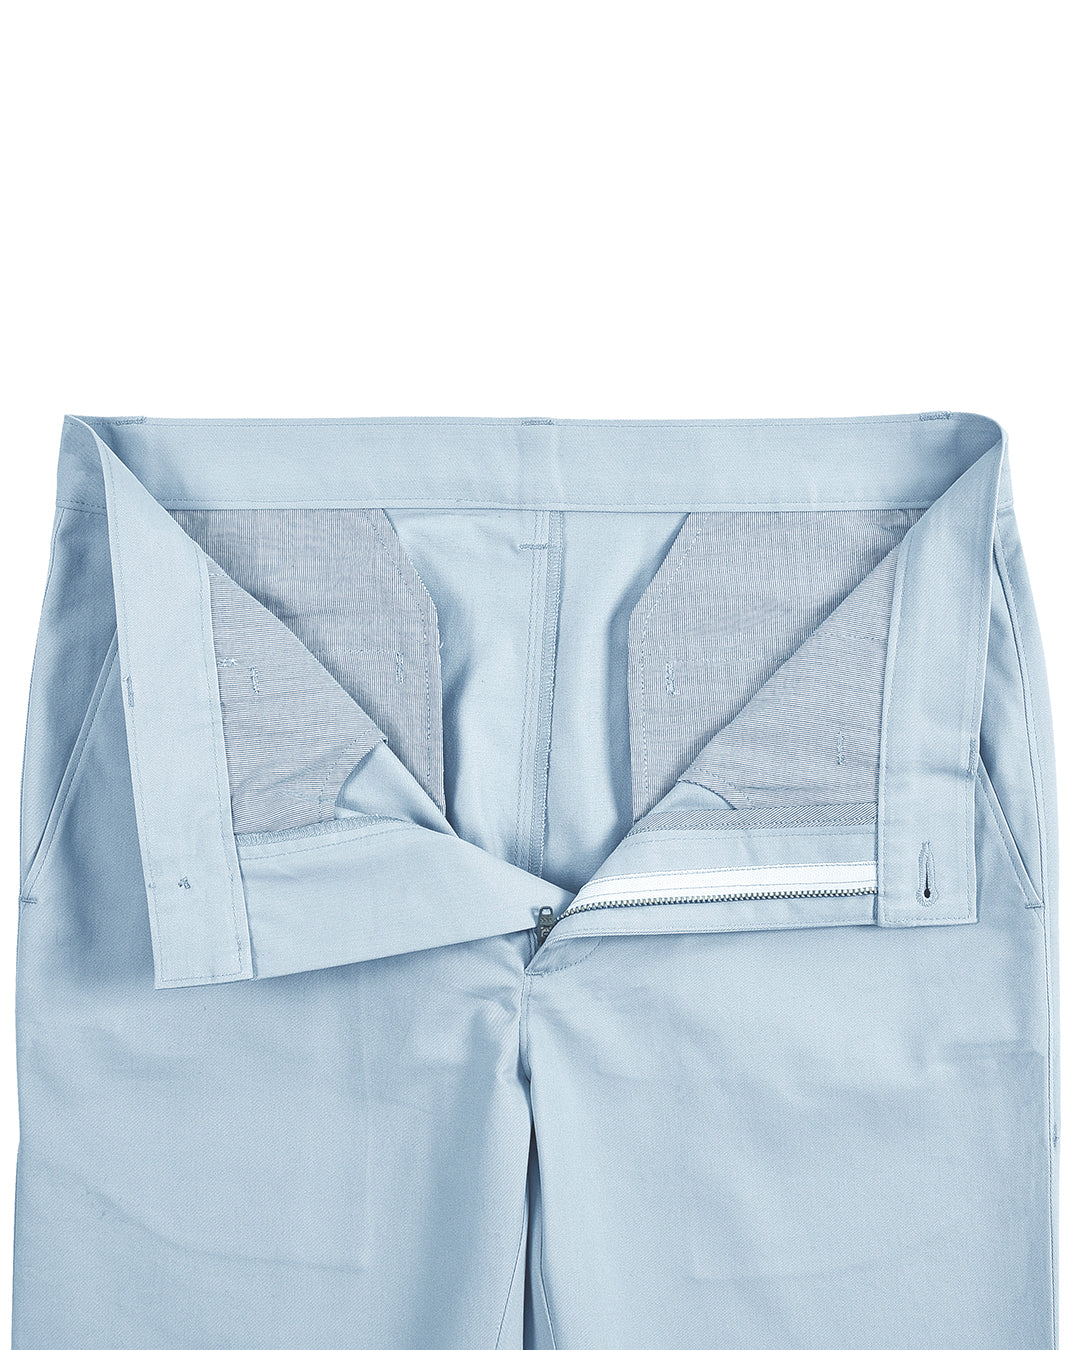 Open front view of custom Genoa Chino pants for men by Luxire in powder blue